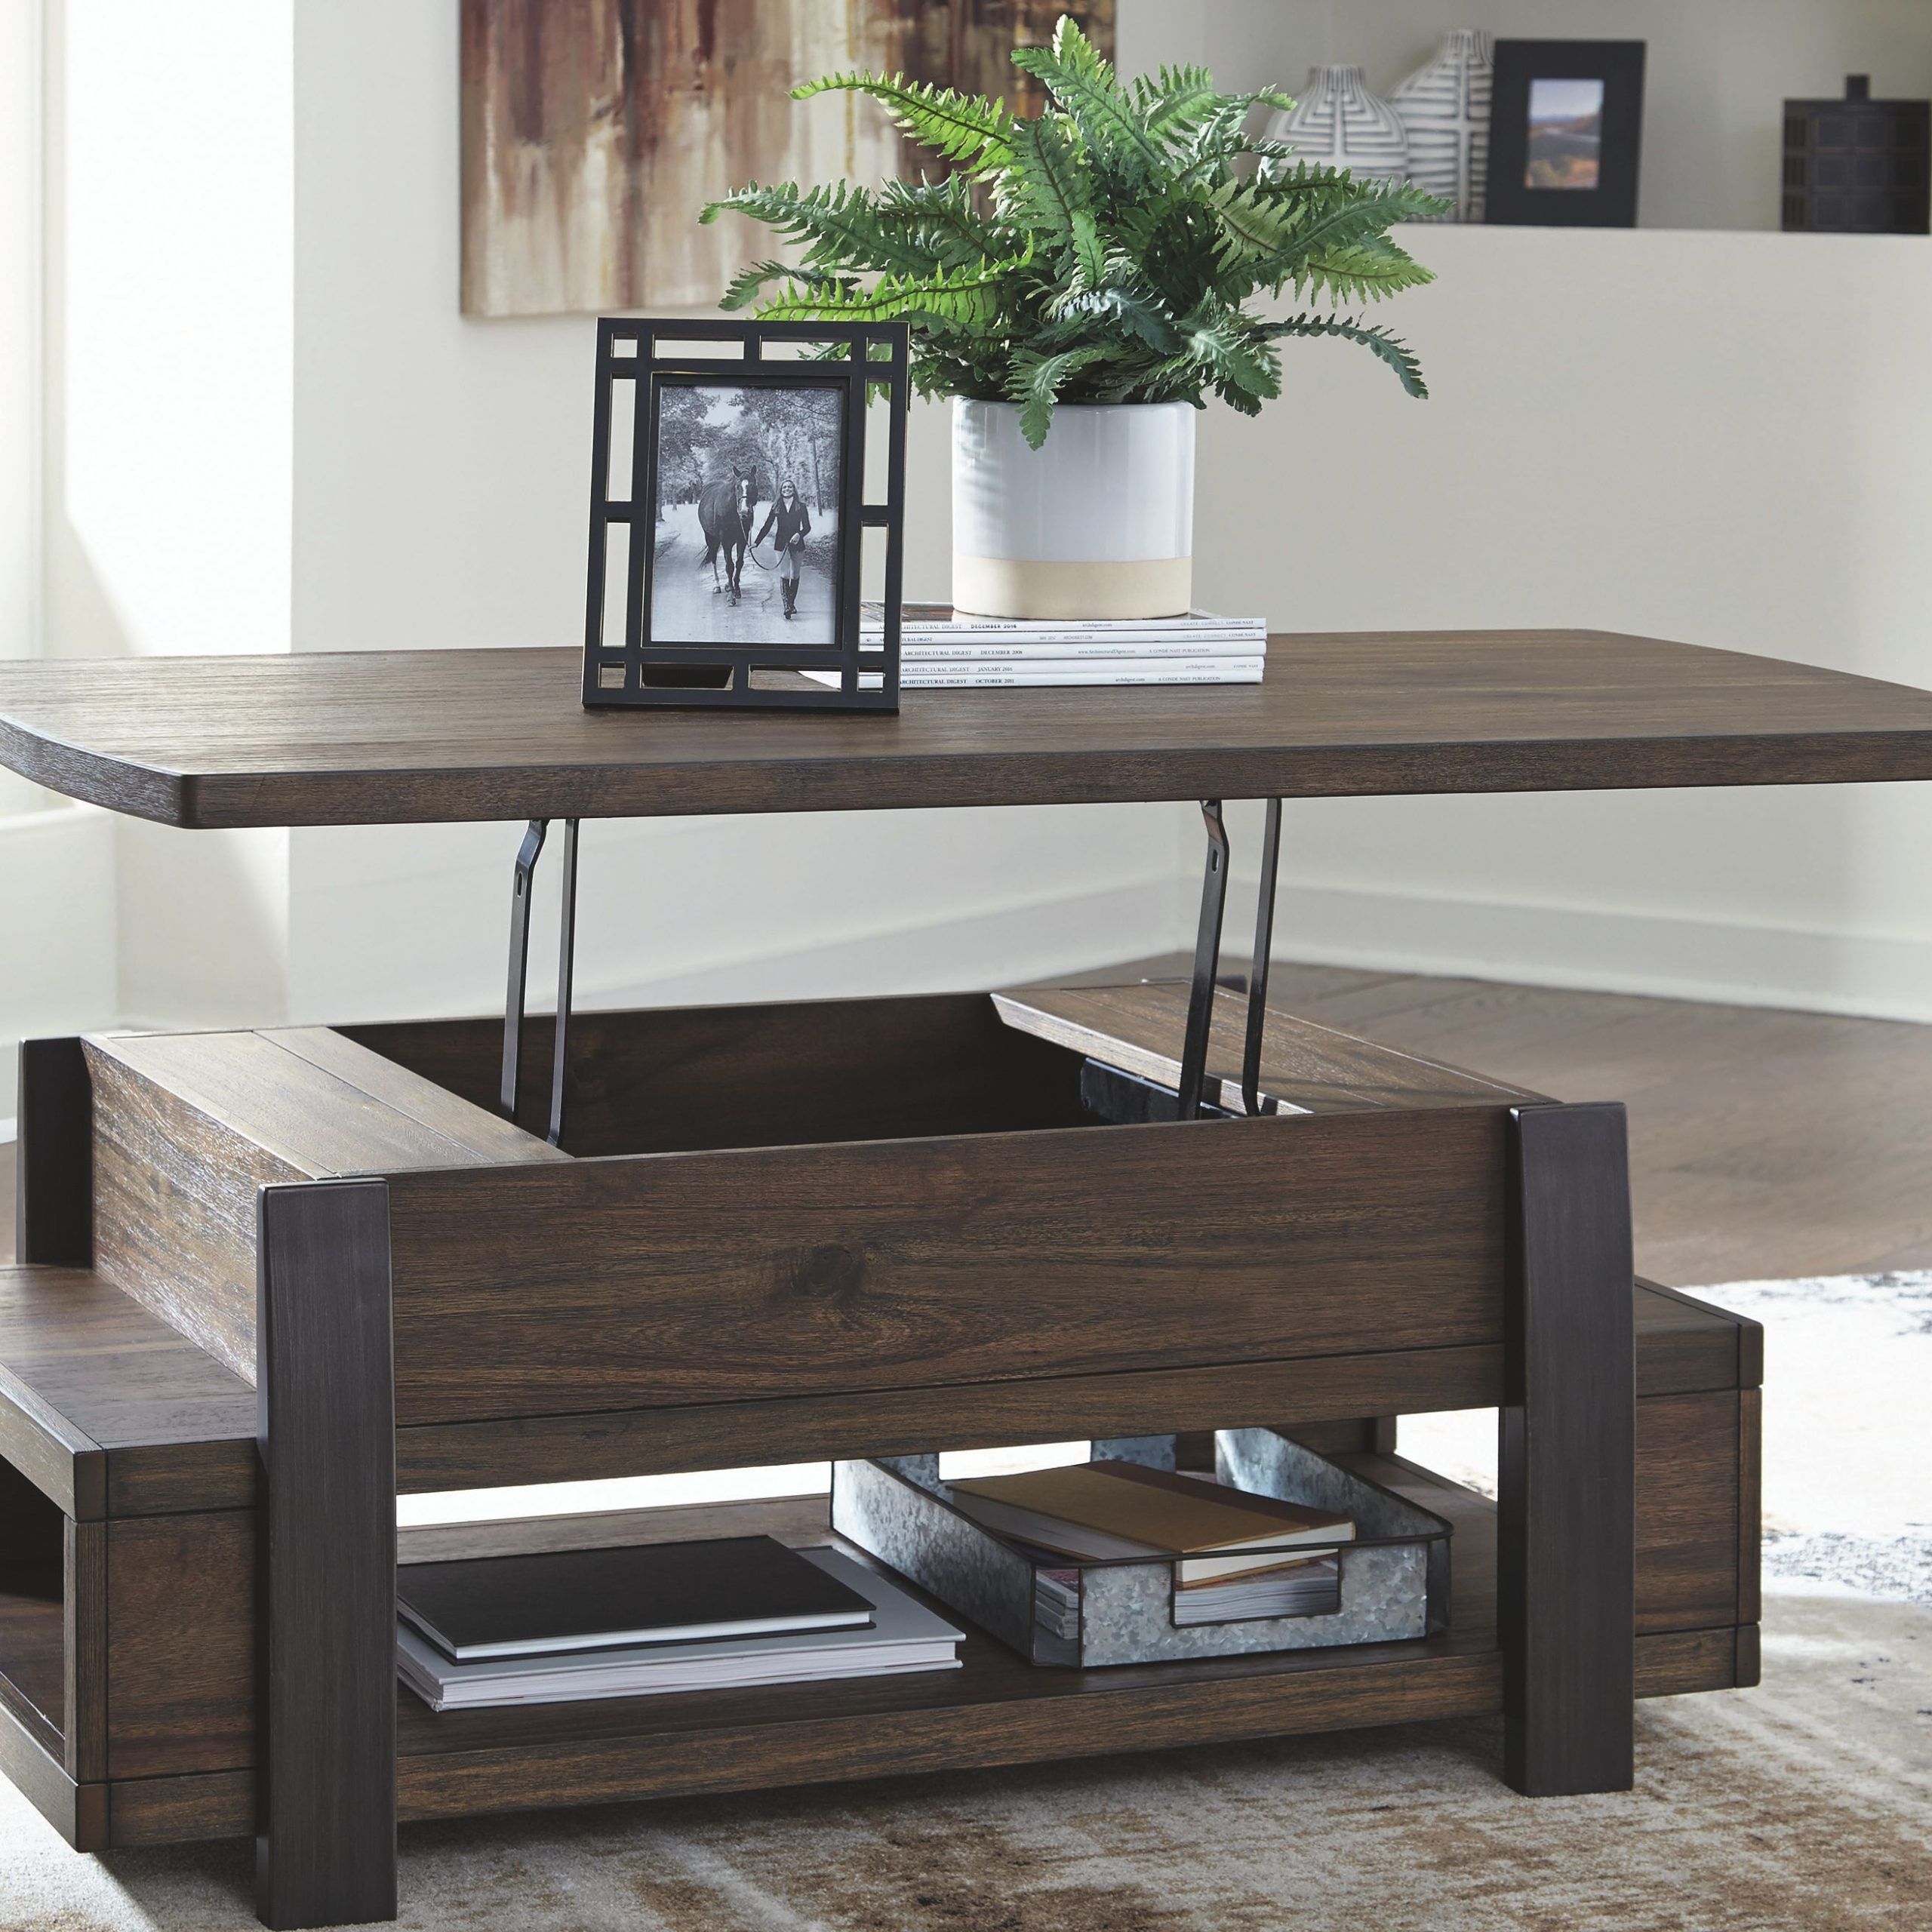 Why The Lift Table Coffee Table Is A Must Have For The Modern Home Regarding Modern Wooden Lift Top Tables (View 6 of 20)